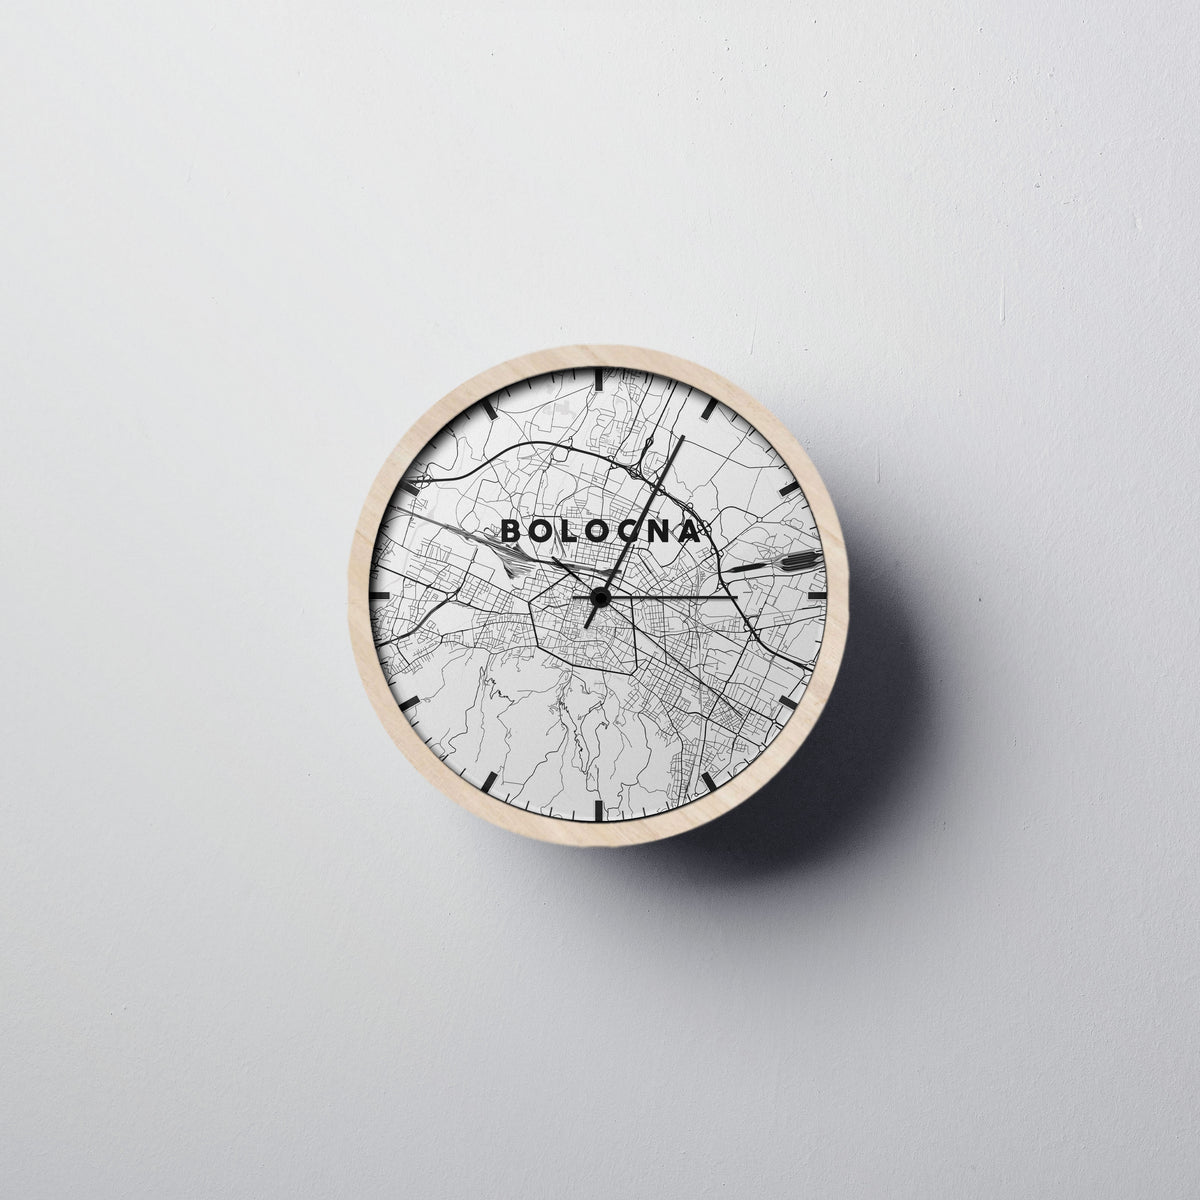 Bologna Wall Clock - Point Two Design